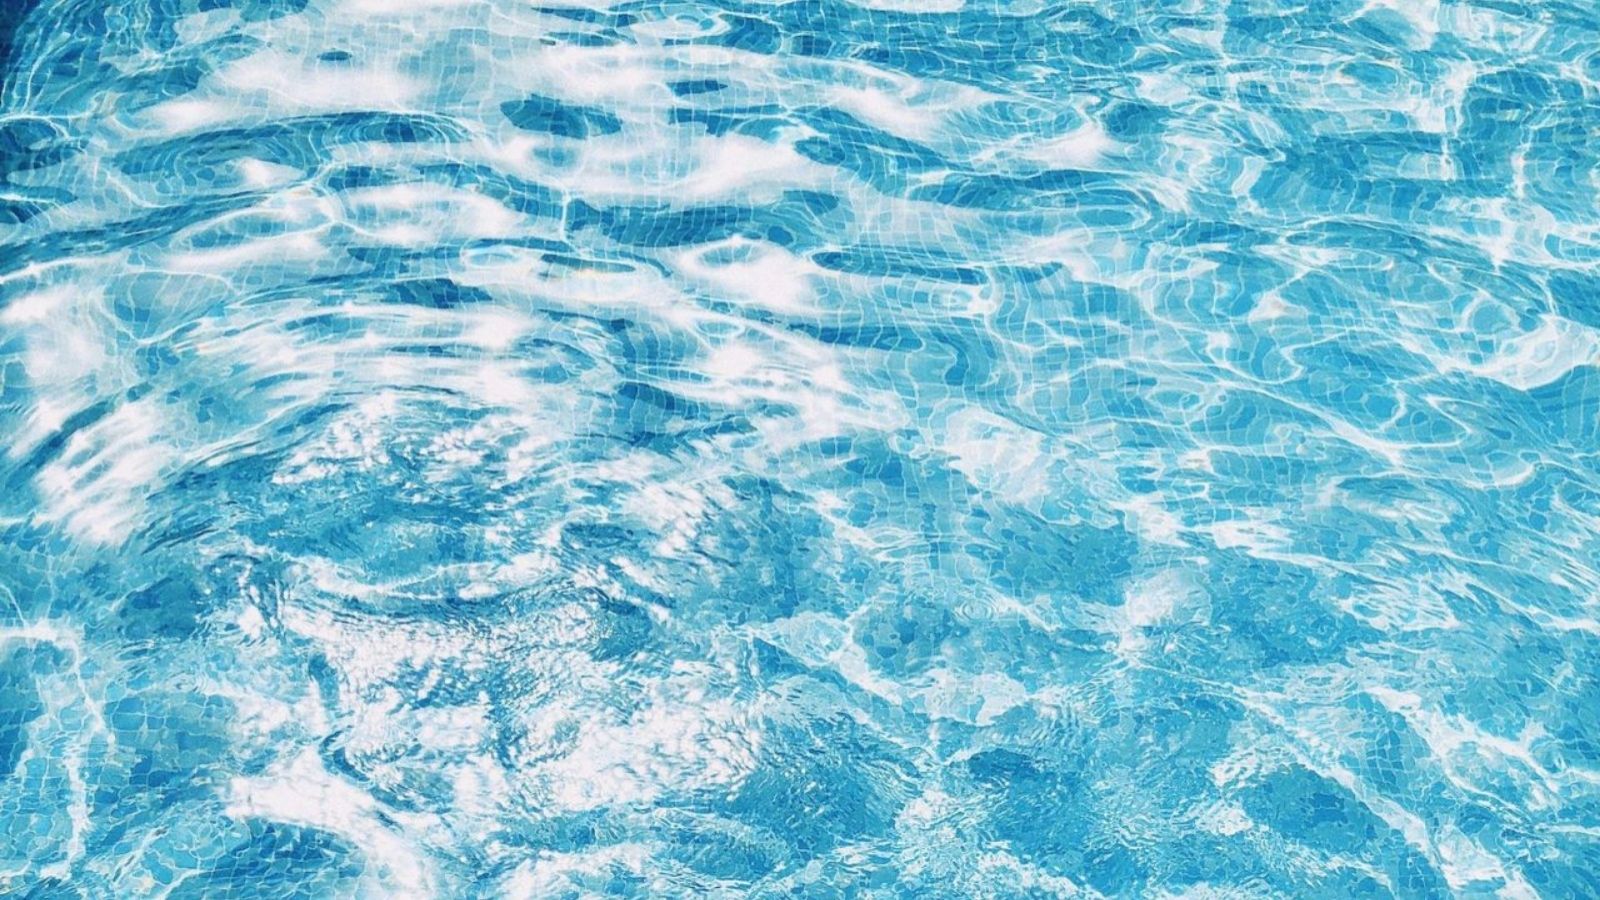 A 2-year-old girl died after falling into a backyard pool in Phoenix....